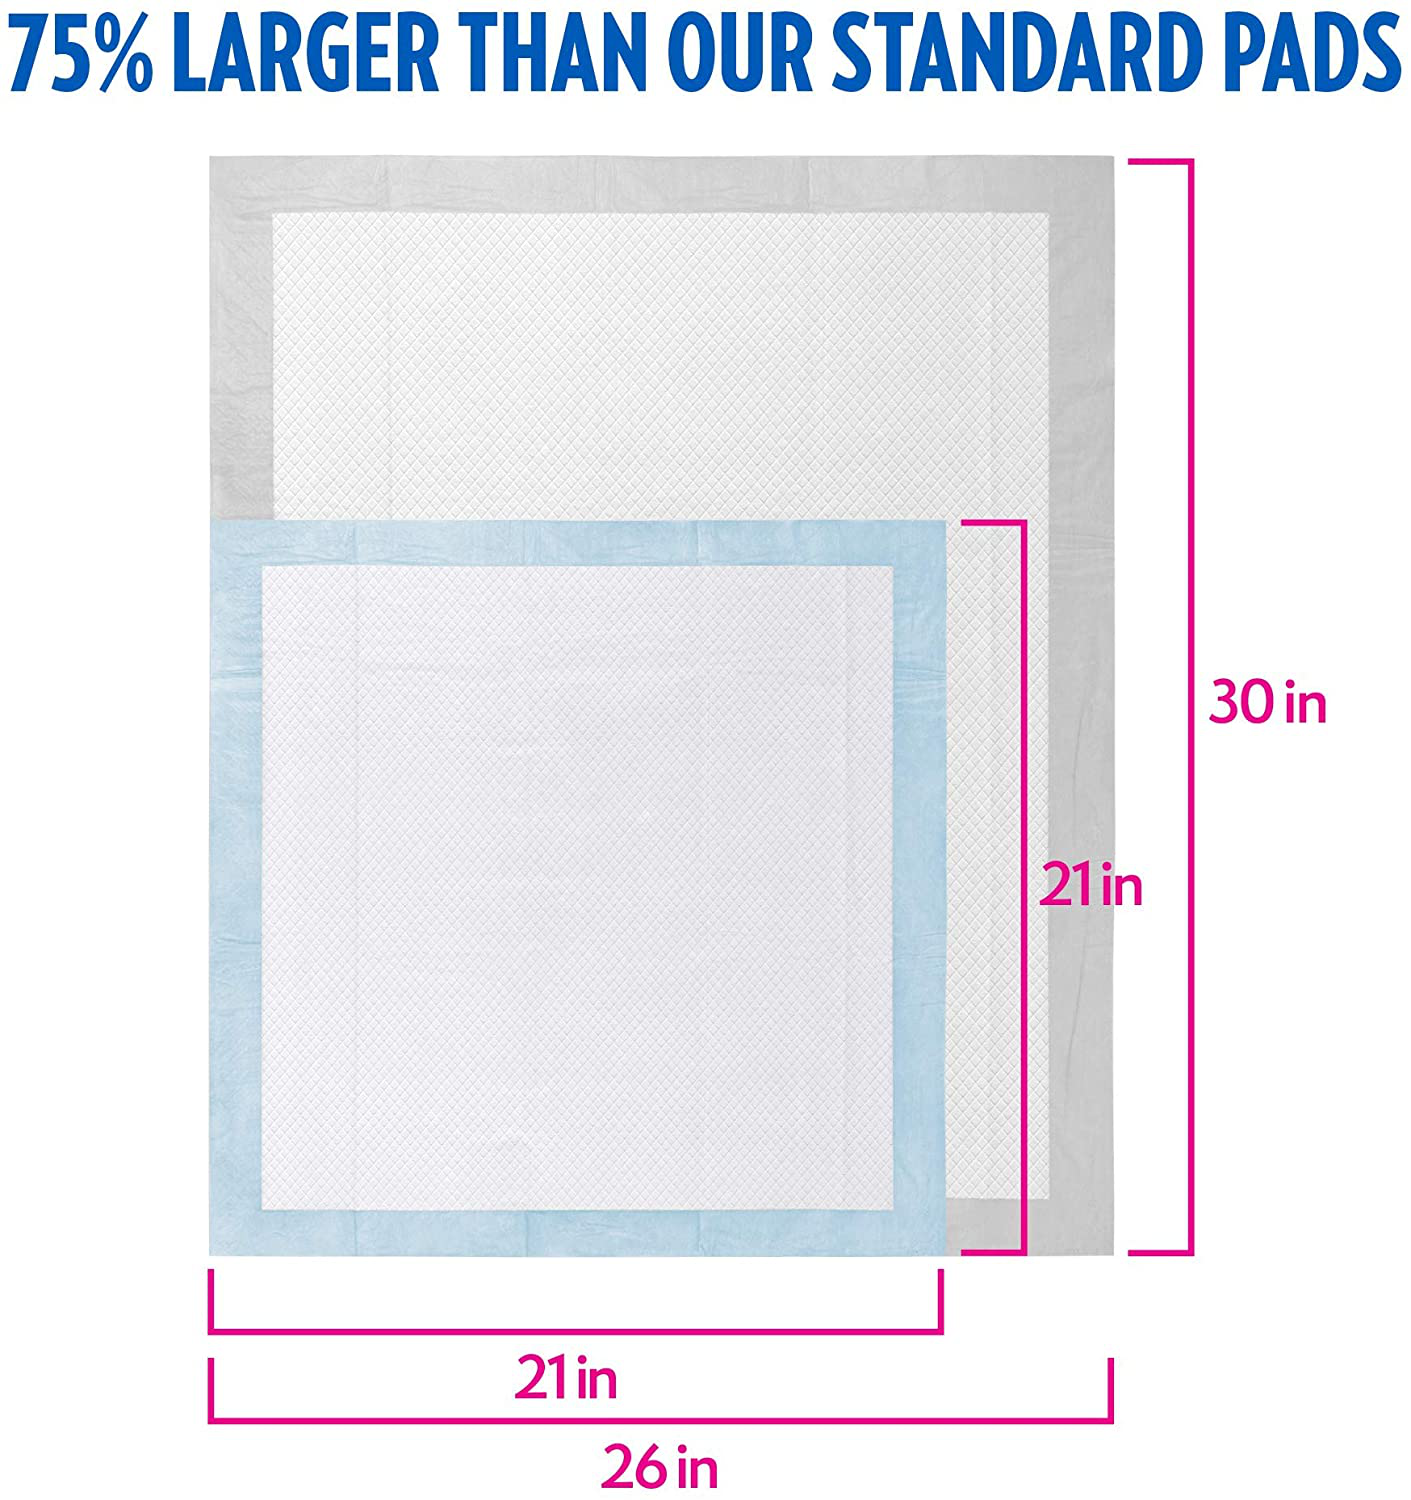 OUT! Heavy Duty XXL Dog Pads | Absorbent Pet Training and Puppy Pads | 30 Pads | 26 X 30 Inches Animals & Pet Supplies > Pet Supplies > Dog Supplies > Dog Diaper Pads & Liners OUT!   